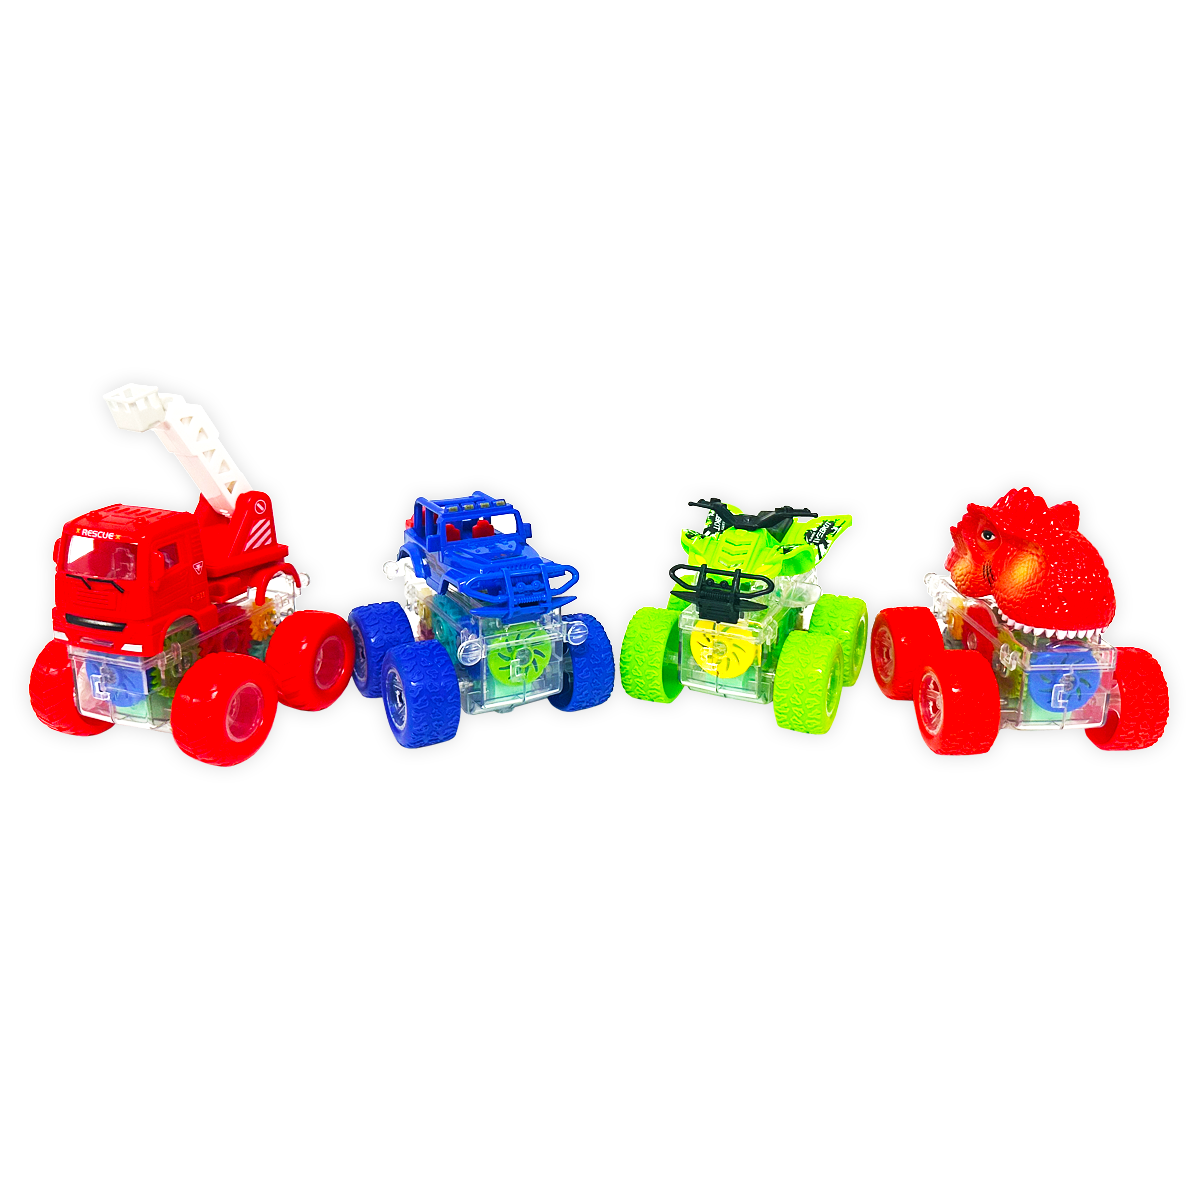 WHOLESALE LIGHT UP VEHICLES TOY CAR 12 PIECES PER DISPLAY 24887